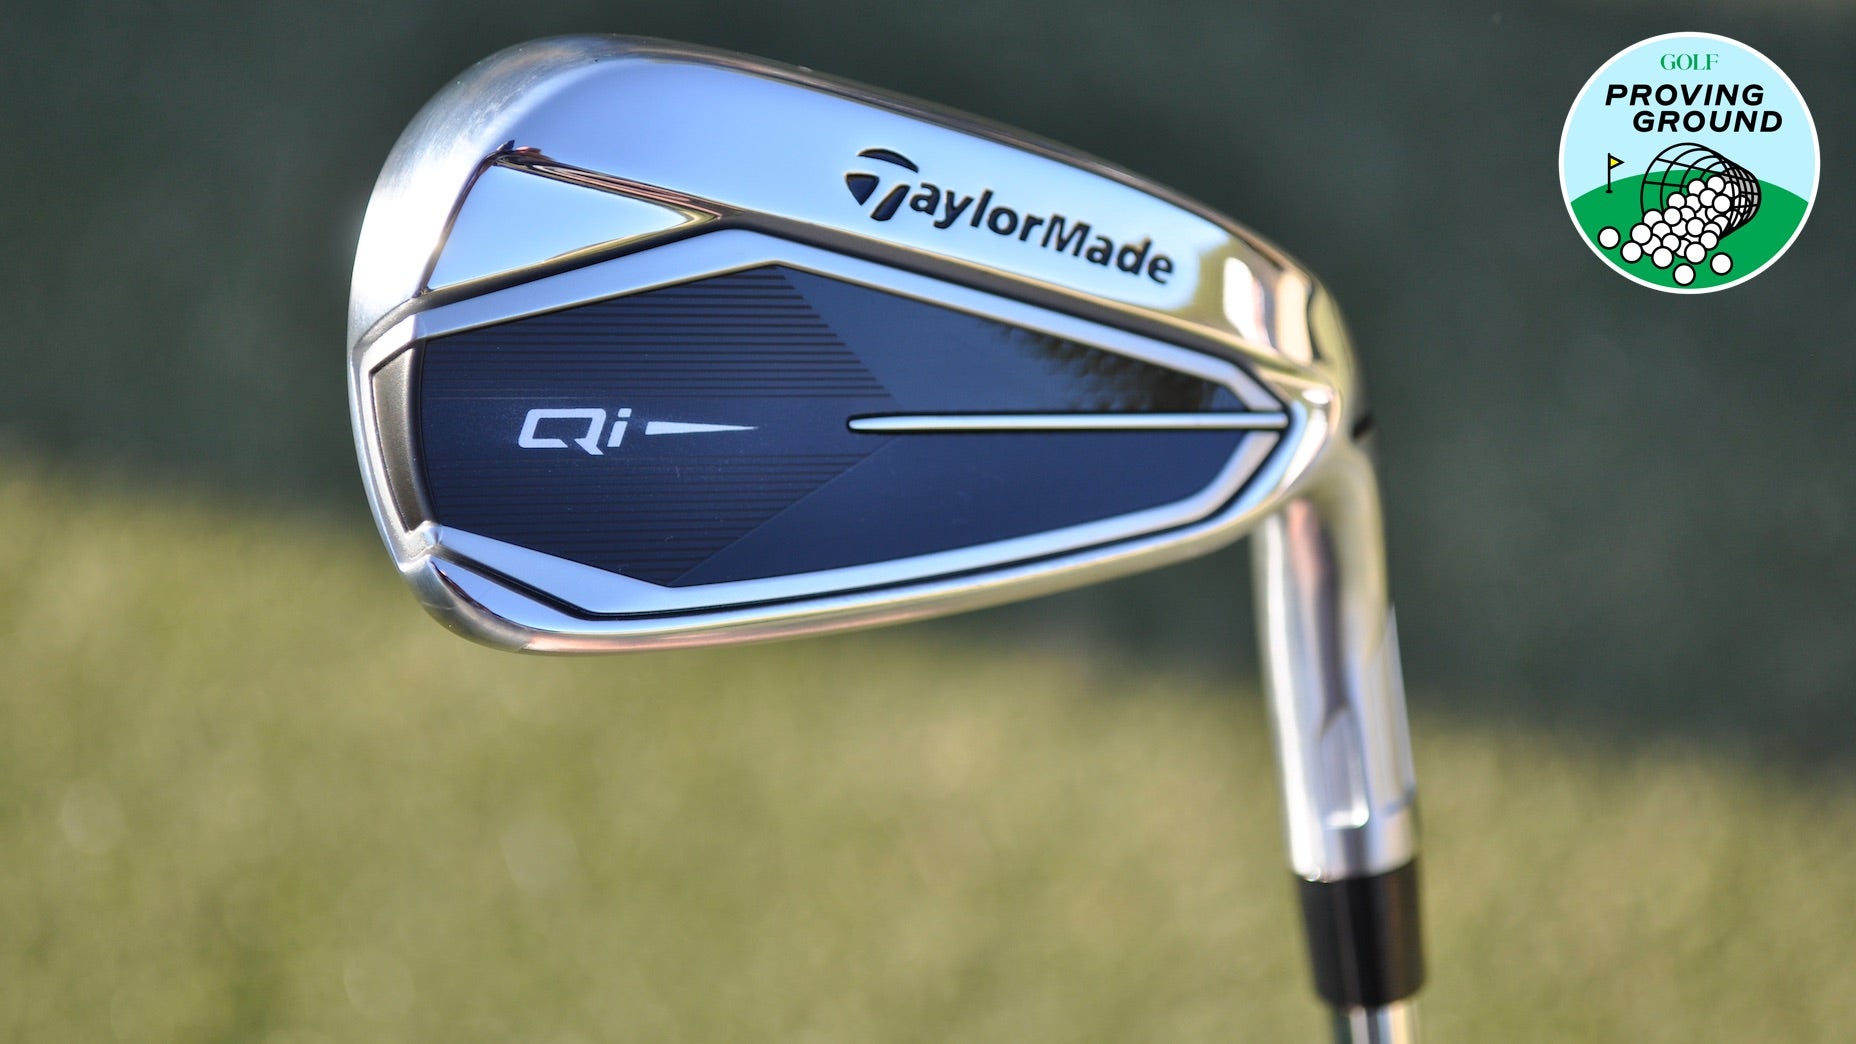 taylormade qi10 irons testing review